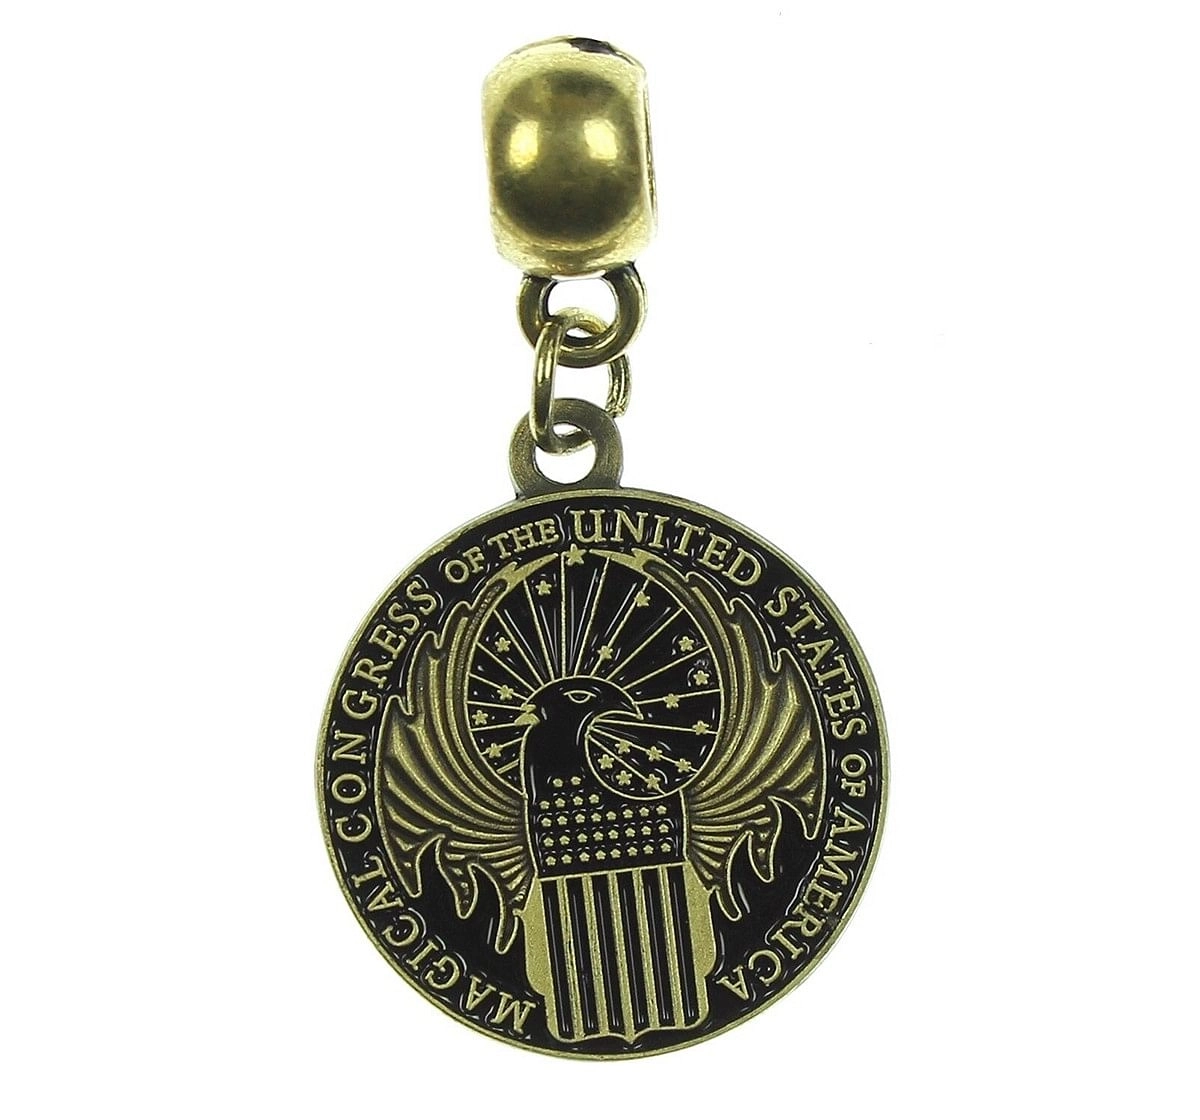 Efg Fantastic Beasts Multi Charm Necklace for age 7Y+ 